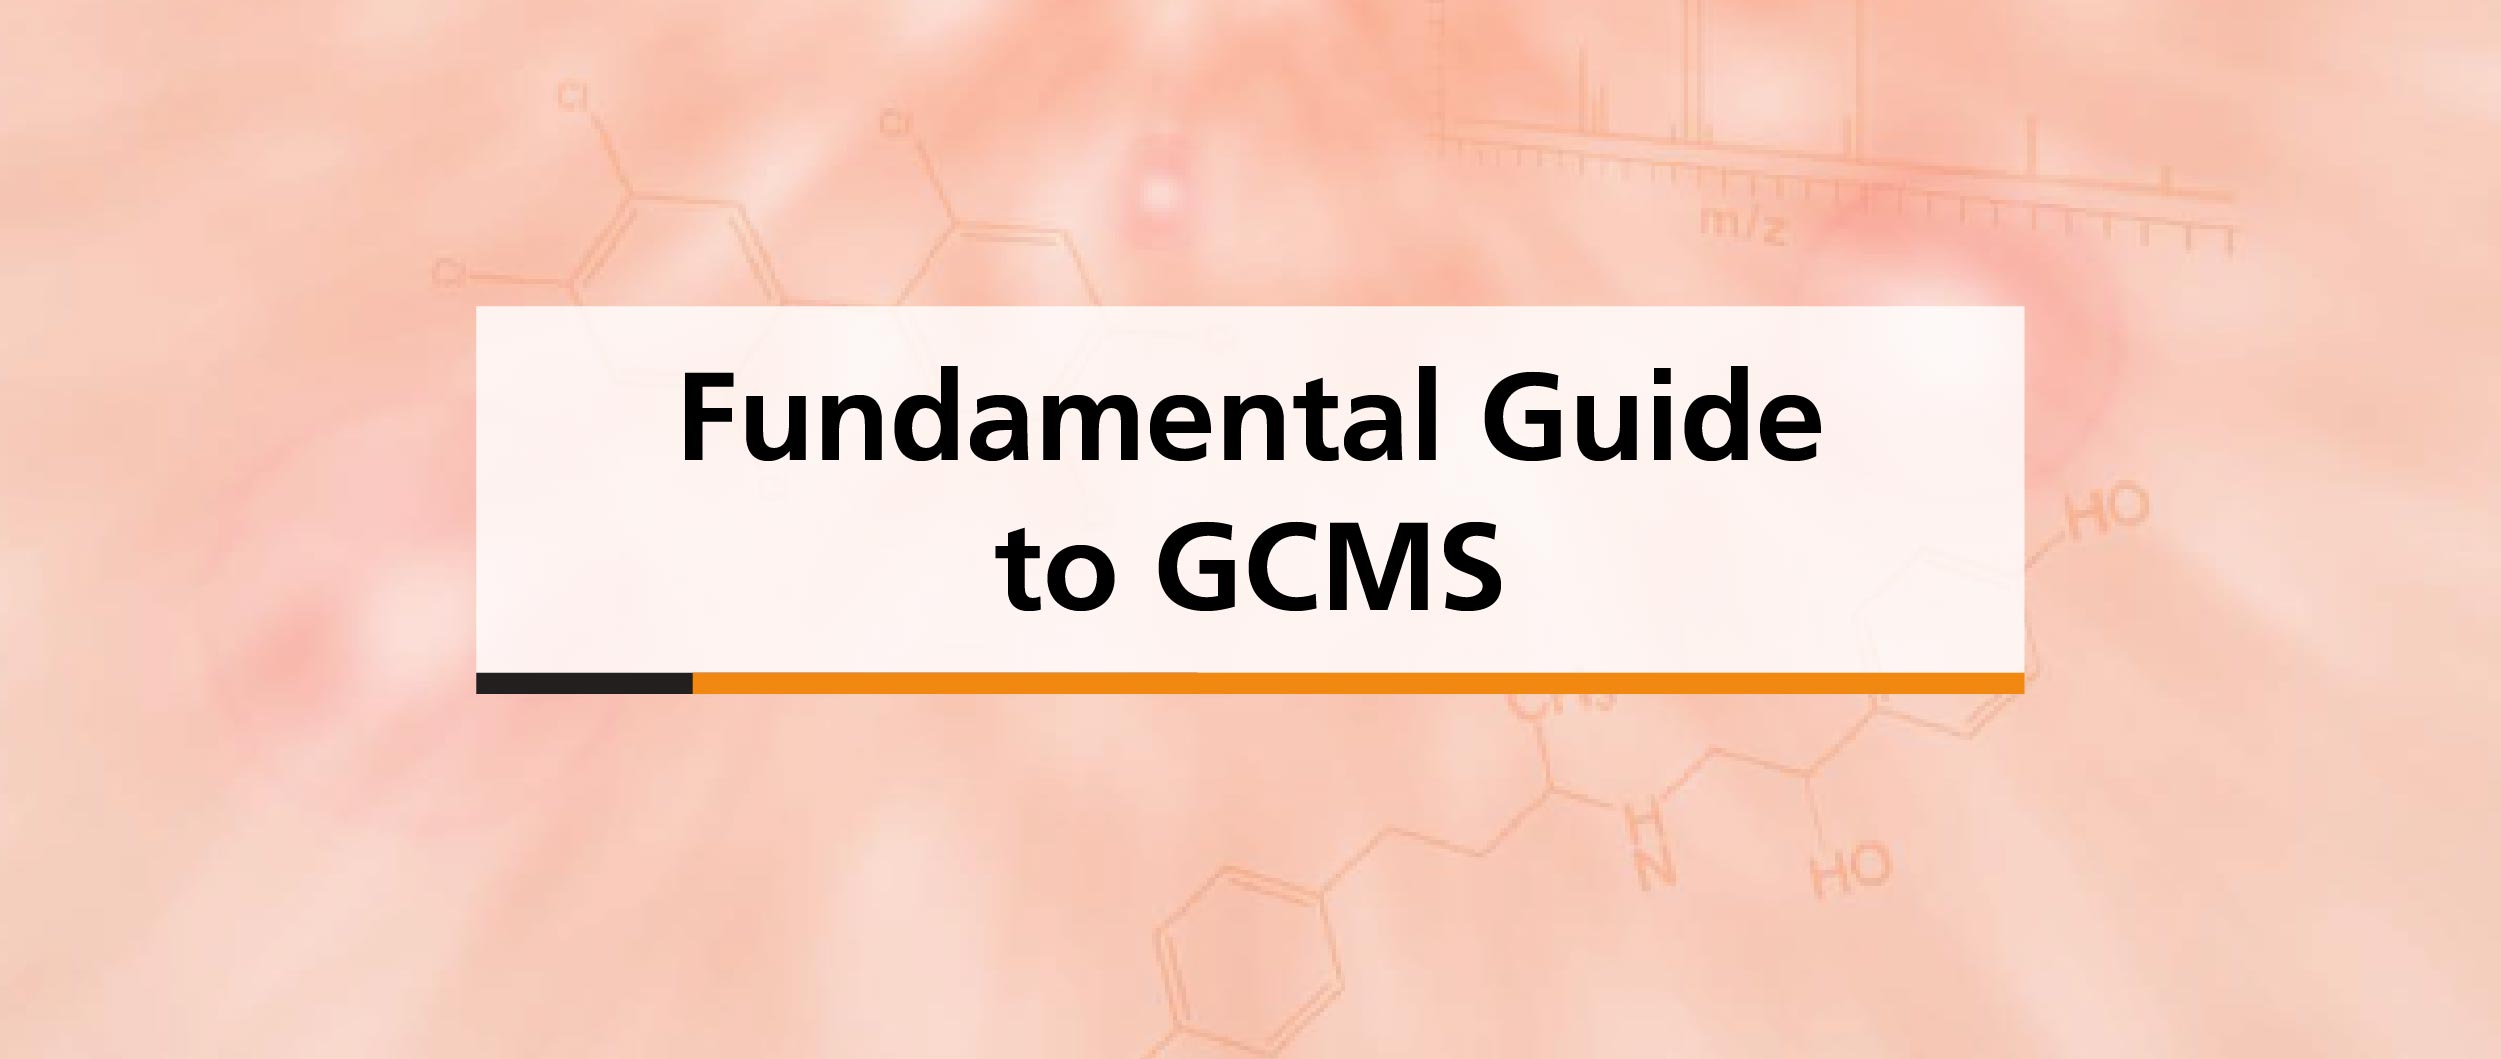 Fundamental Guide to GCMS